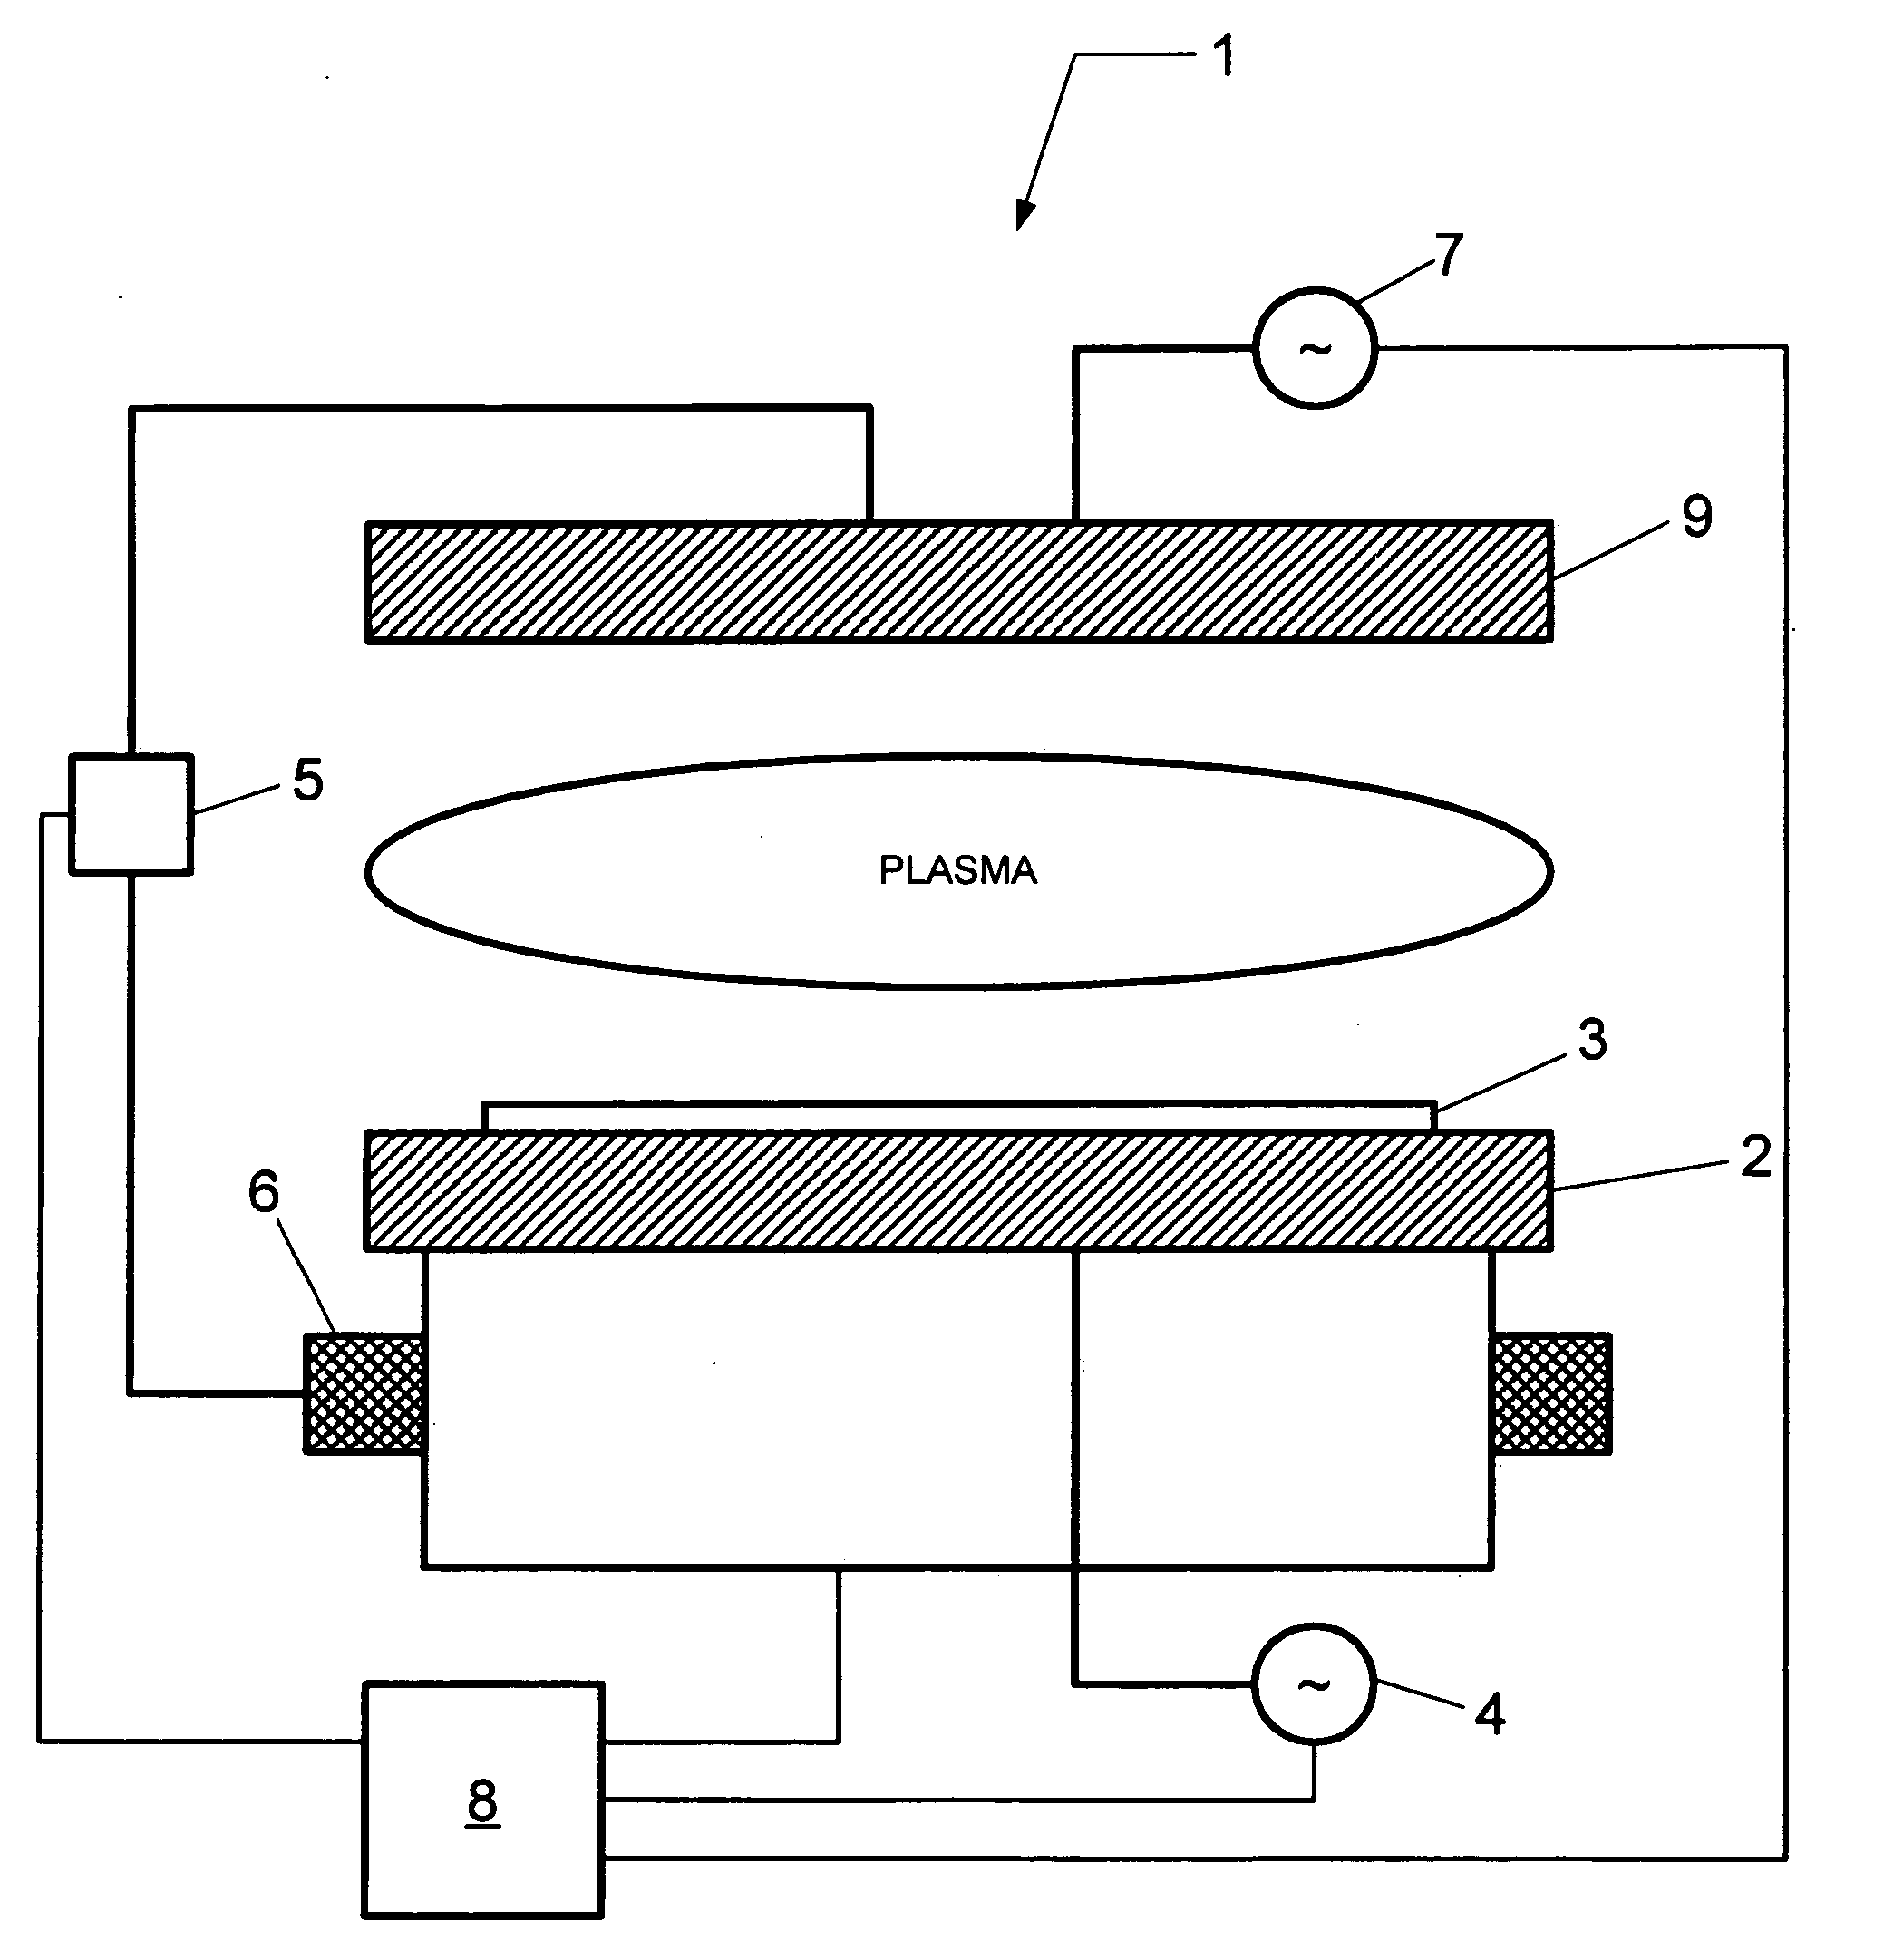 Method and apparatus for detecting endpoint in a dry etching system by monitoring a superimposed DC current